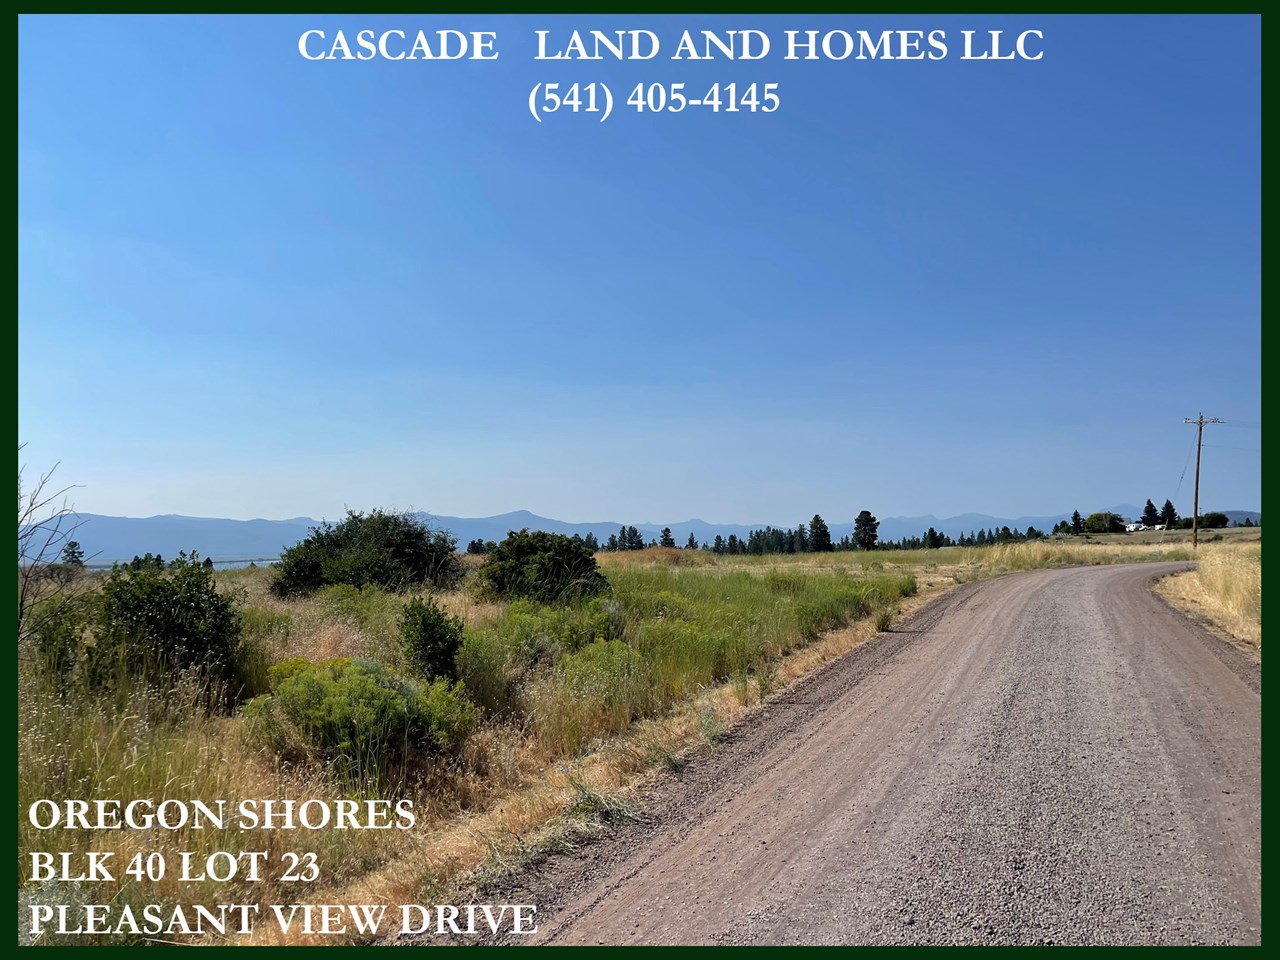 the roads here are easy to travel. the roads leading to the subdivision are paved, and the roads inside the subdivision are compacted gravel and very well maintained for easy access to the parcel.